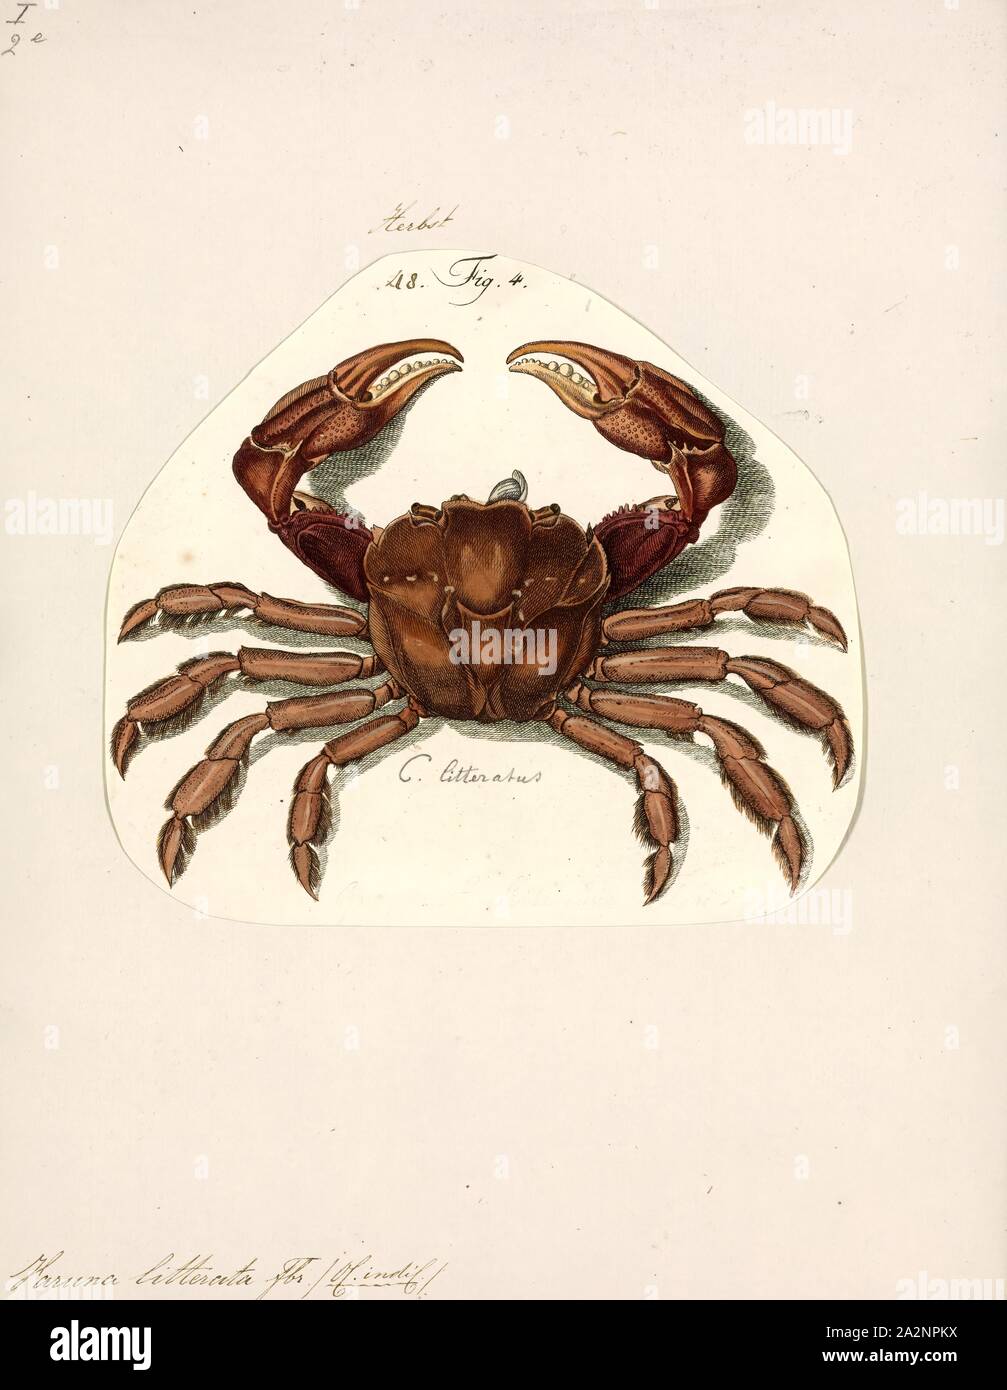 Varuna litterata, Print, The river swimming crab, Varuna litterata, is a euryhaline species of crab. Known from India, East Africa, Australia and Japan. This species was recorded in a fresh water stream in Coffs Harbour in eastern Australia Stock Photo